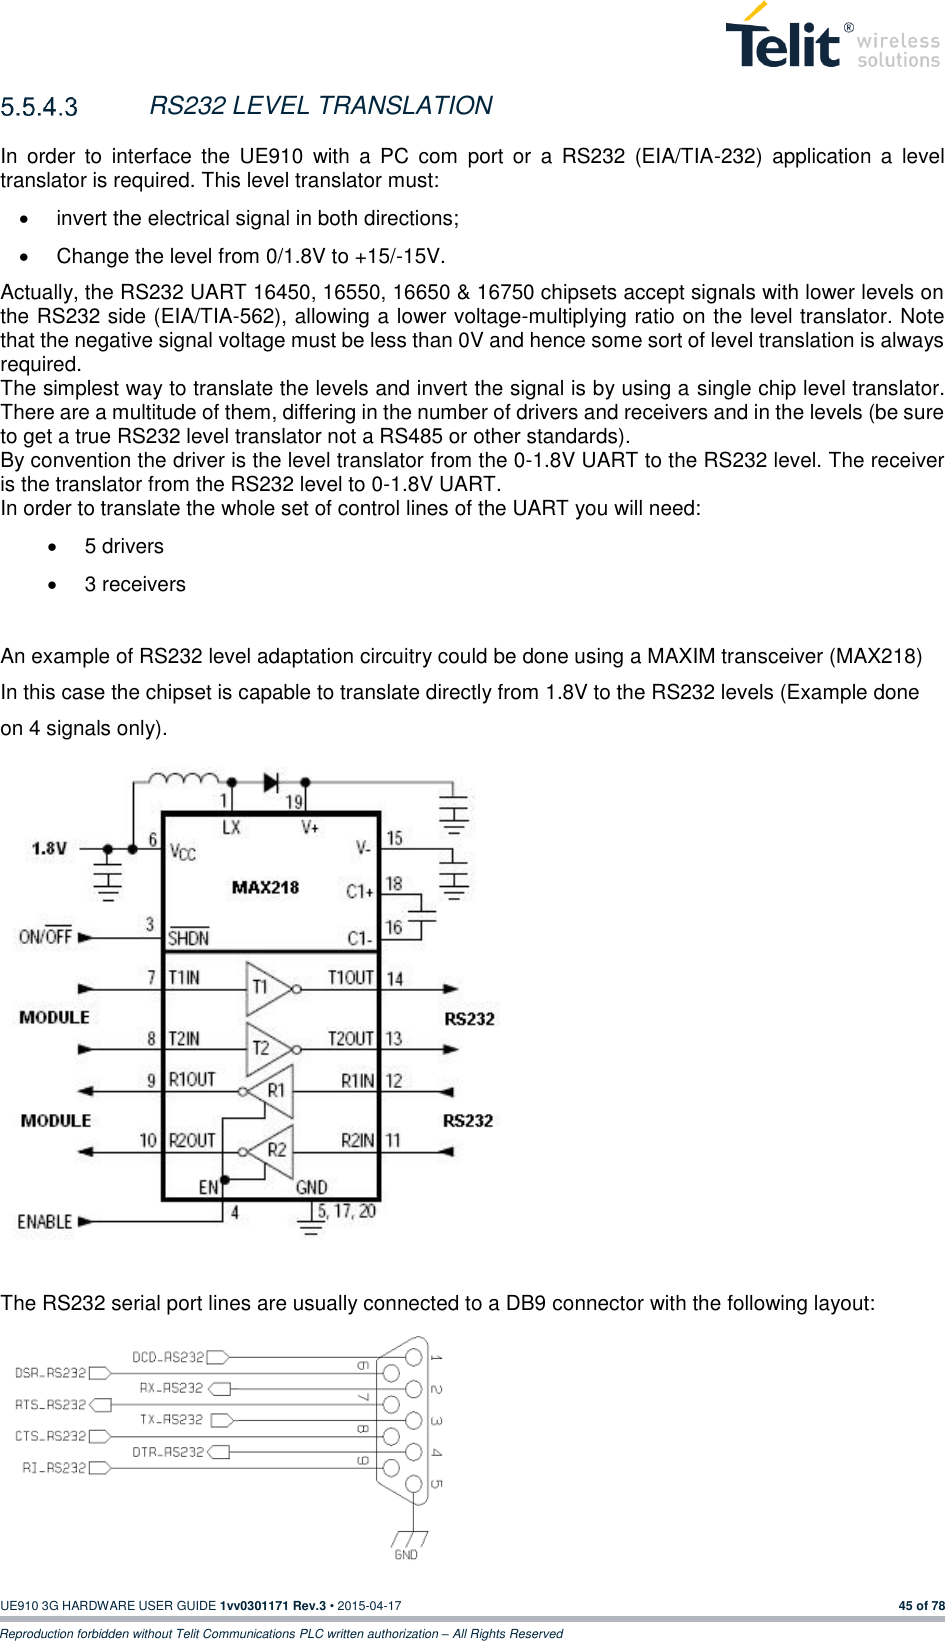  UE910 3G HARDWARE USER GUIDE 1vv0301171 Rev.3 • 2015-04-17 45 of 78 Reproduction forbidden without Telit Communications PLC written authorization – All Rights Reserved   RS232 LEVEL TRANSLATION  In  order  to  interface  the  UE910  with  a  PC  com  port  or  a  RS232  (EIA/TIA-232)  application  a  level translator is required. This level translator must:   invert the electrical signal in both directions;   Change the level from 0/1.8V to +15/-15V. Actually, the RS232 UART 16450, 16550, 16650 &amp; 16750 chipsets accept signals with lower levels on the RS232 side (EIA/TIA-562), allowing a lower voltage-multiplying ratio on the level translator. Note that the negative signal voltage must be less than 0V and hence some sort of level translation is always required.  The simplest way to translate the levels and invert the signal is by using a single chip level translator. There are a multitude of them, differing in the number of drivers and receivers and in the levels (be sure to get a true RS232 level translator not a RS485 or other standards). By convention the driver is the level translator from the 0-1.8V UART to the RS232 level. The receiver is the translator from the RS232 level to 0-1.8V UART. In order to translate the whole set of control lines of the UART you will need:   5 drivers   3 receivers  An example of RS232 level adaptation circuitry could be done using a MAXIM transceiver (MAX218)  In this case the chipset is capable to translate directly from 1.8V to the RS232 levels (Example done on 4 signals only).                The RS232 serial port lines are usually connected to a DB9 connector with the following layout:        